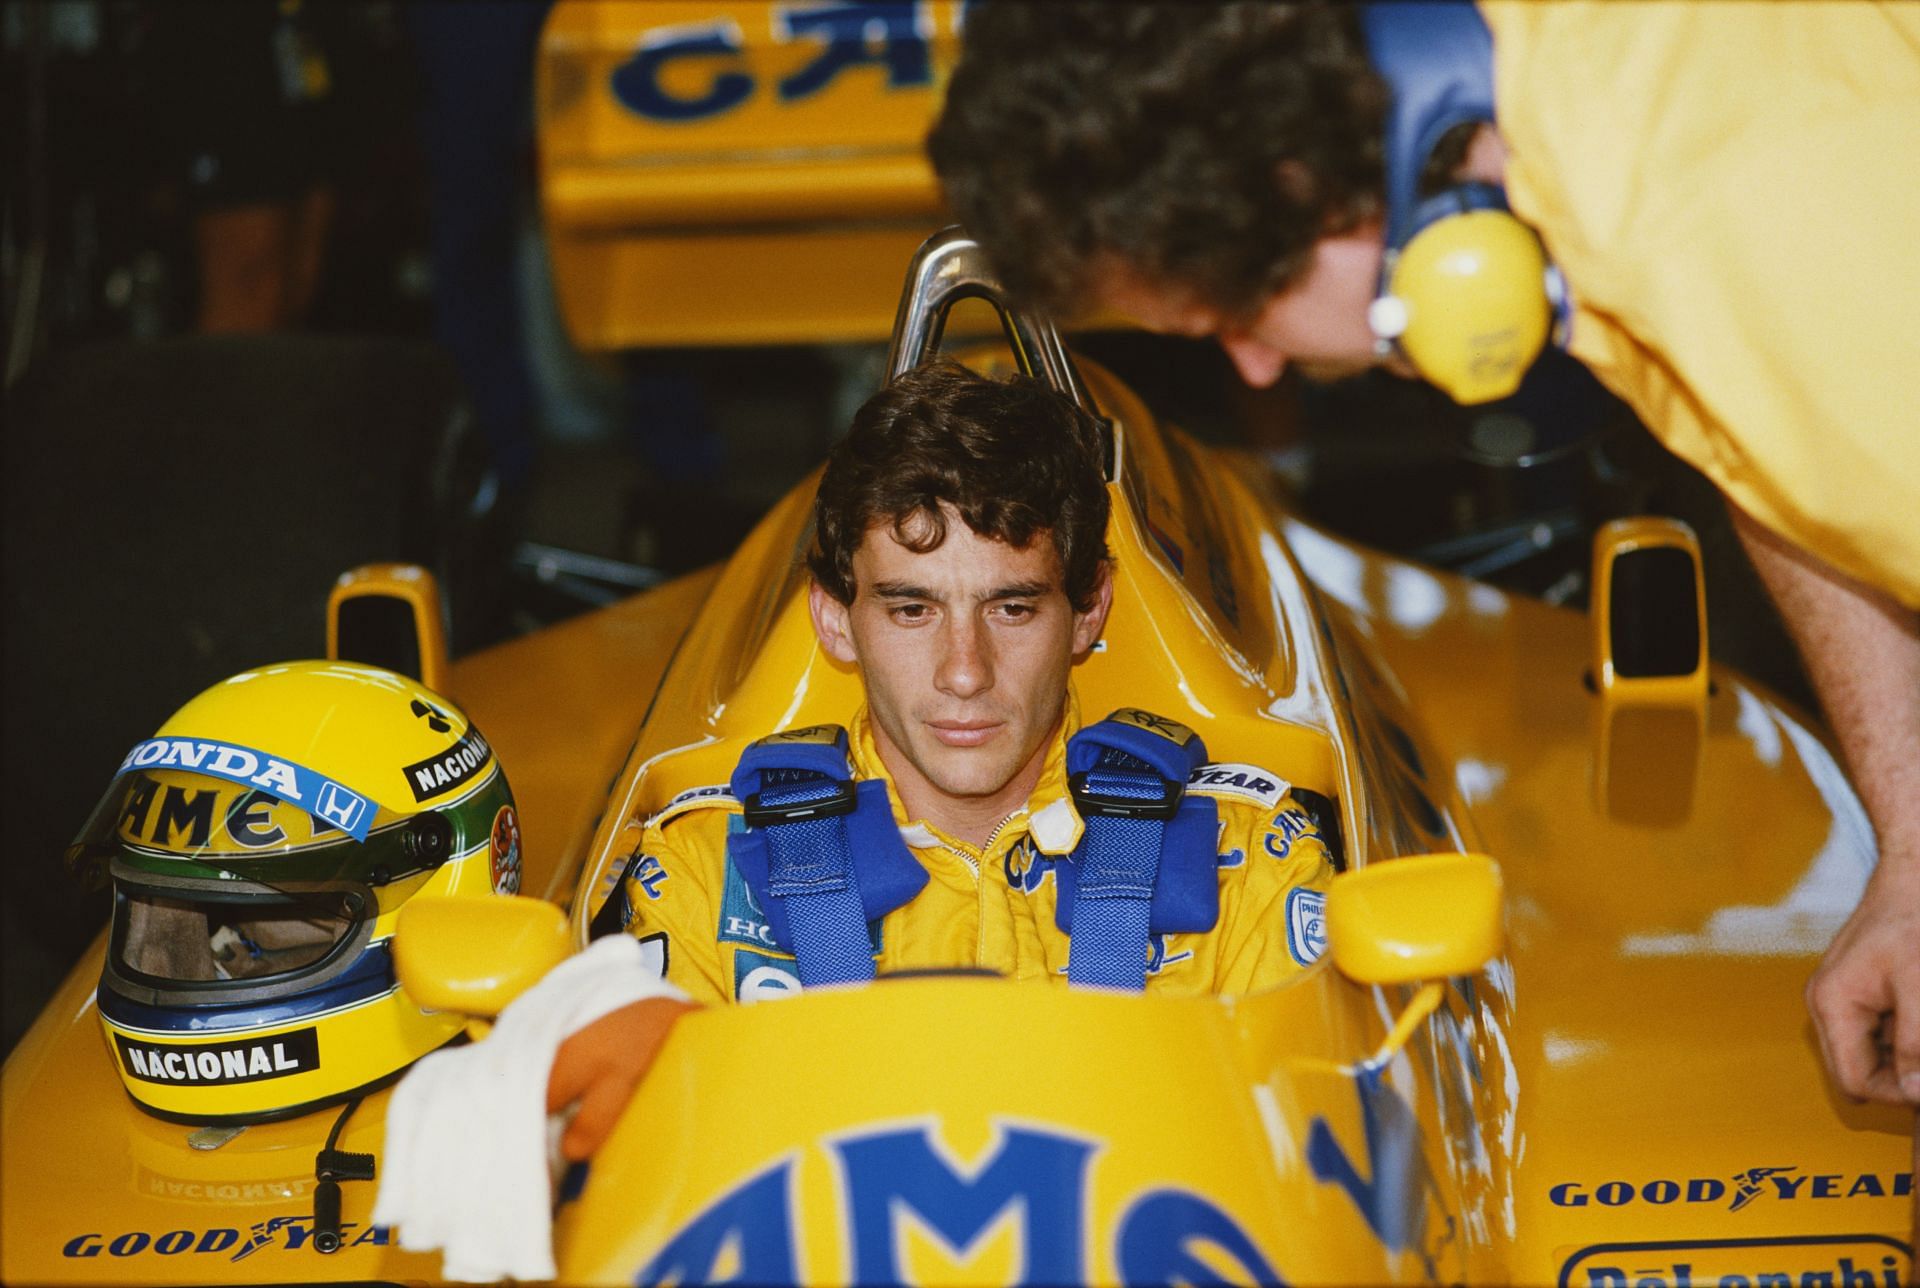 Ayrton Senna took his first win in Monaco in the yellow-liveried Lotus